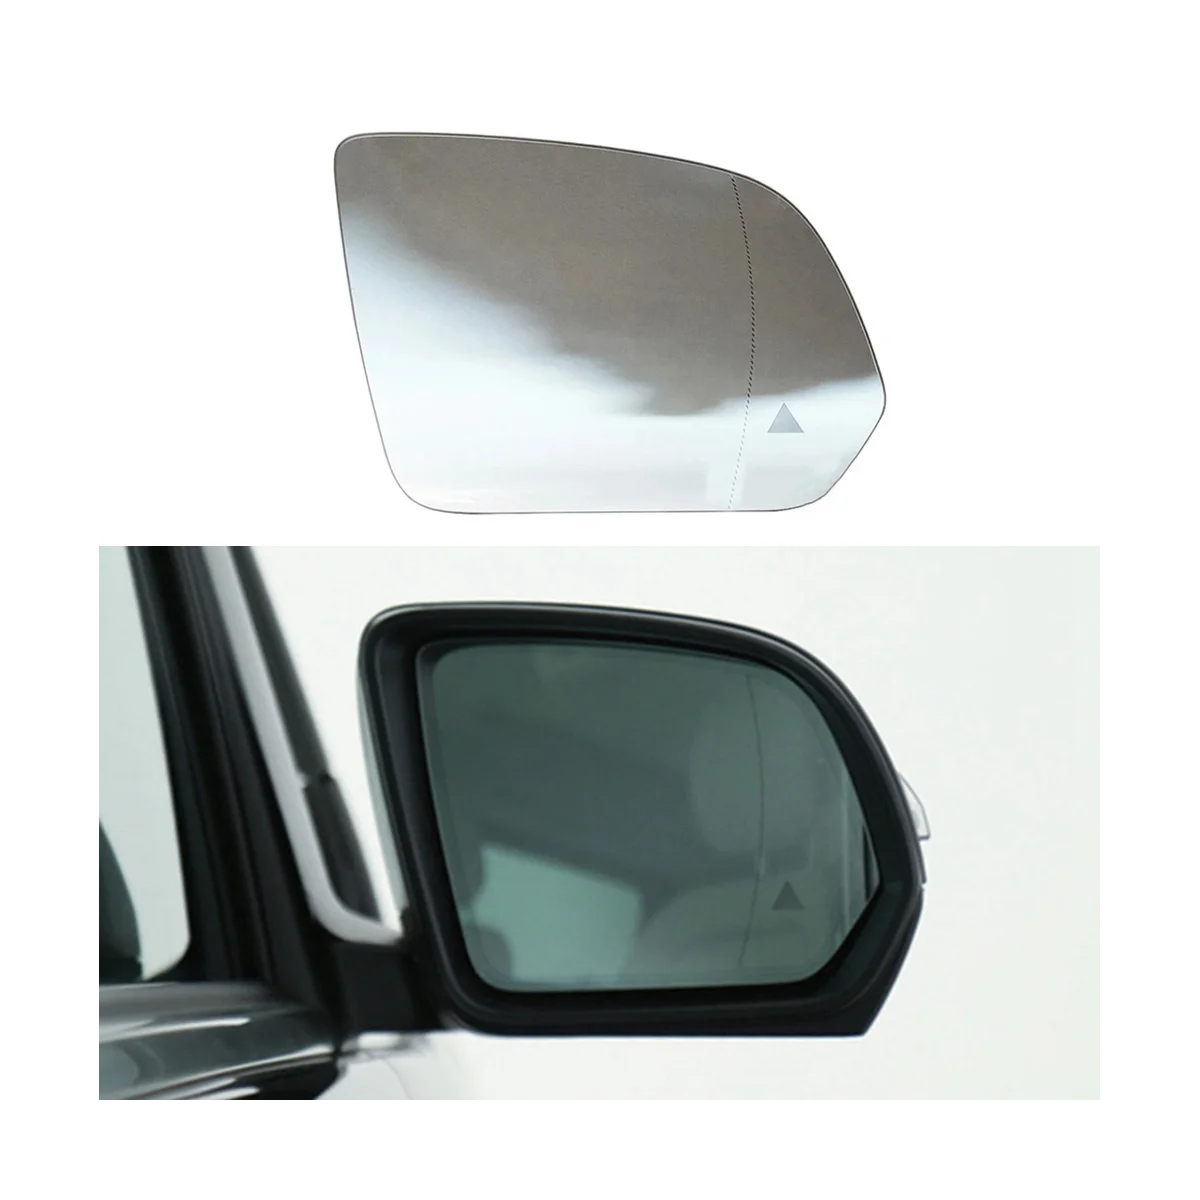 

Car Auto Heated Blind Spot Warning Wing Rear Mirror Gl for Mercedes-Benz V Cl Vito W447 2016-2020